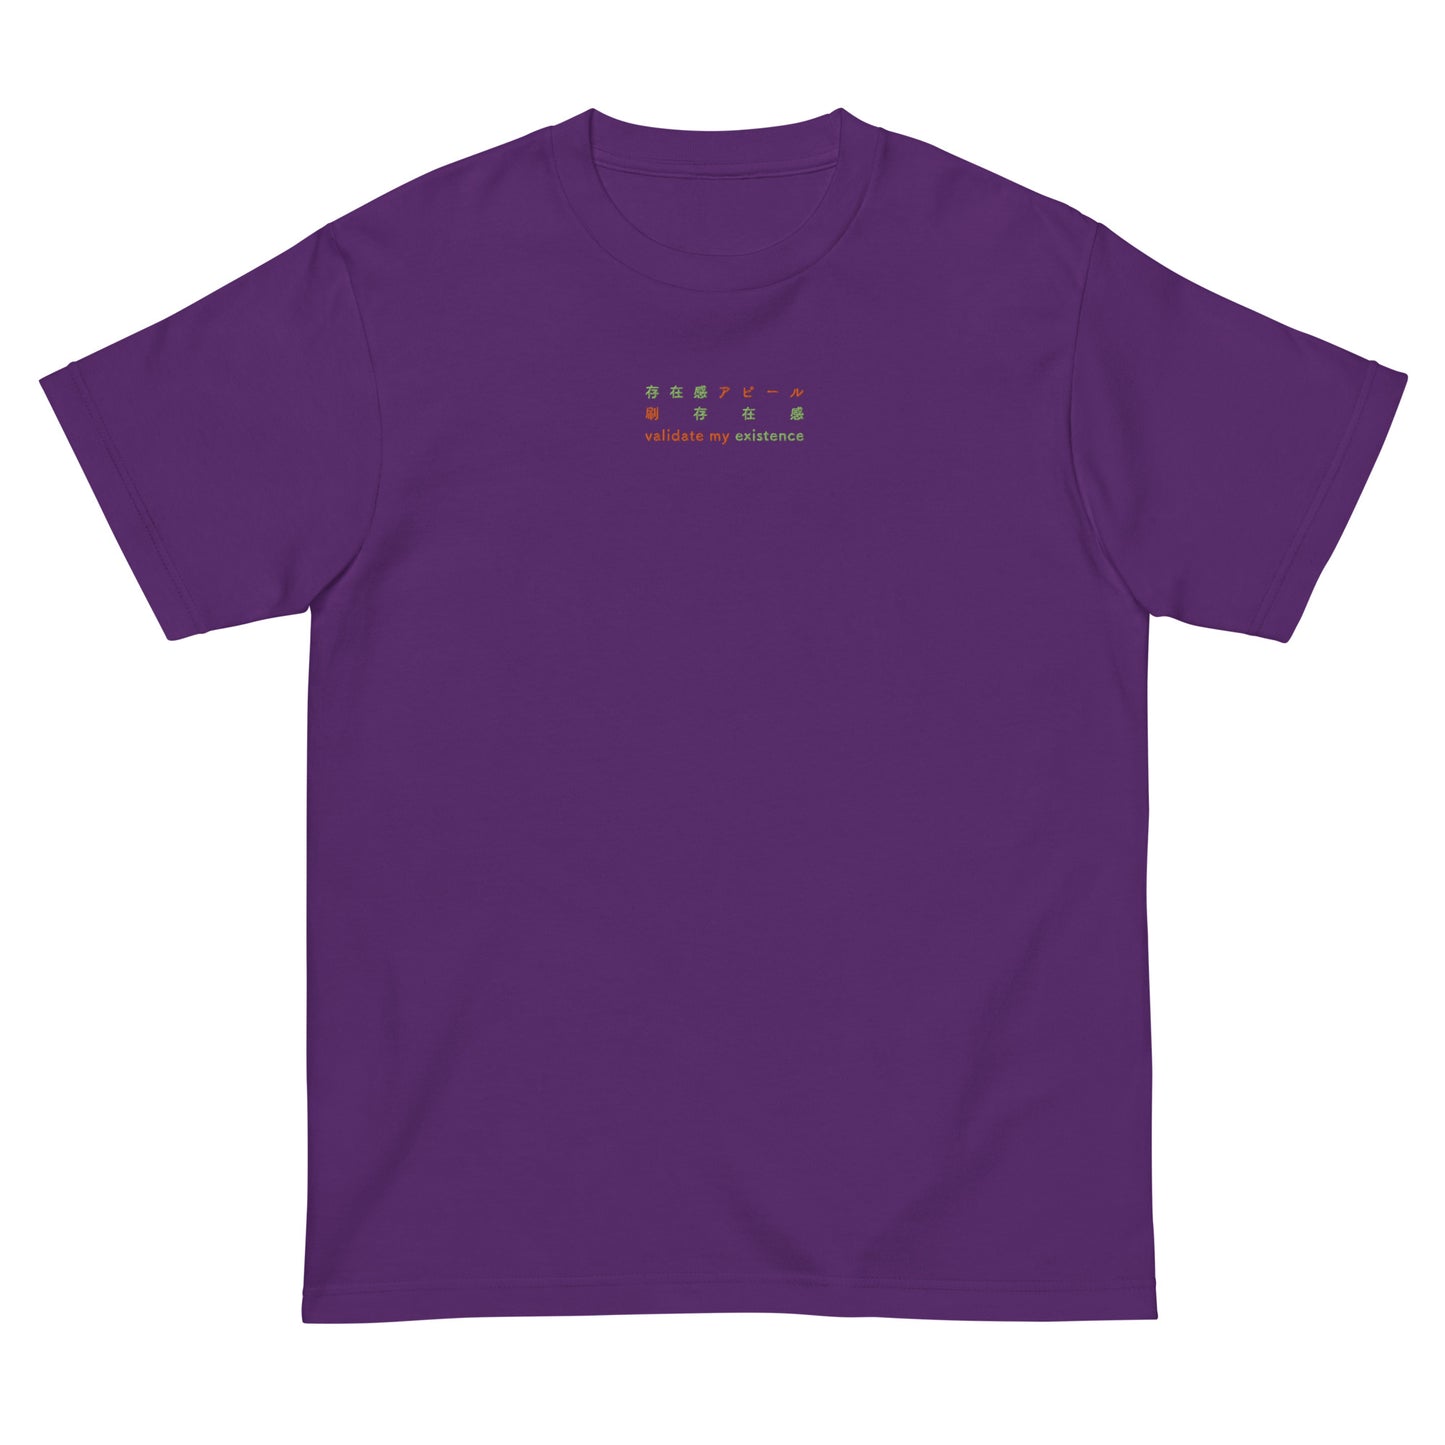 Purple High Quality Tee - Front Design with an Orange,Green Embroidery "Validate my Existence" in Japanese,Chinese and English